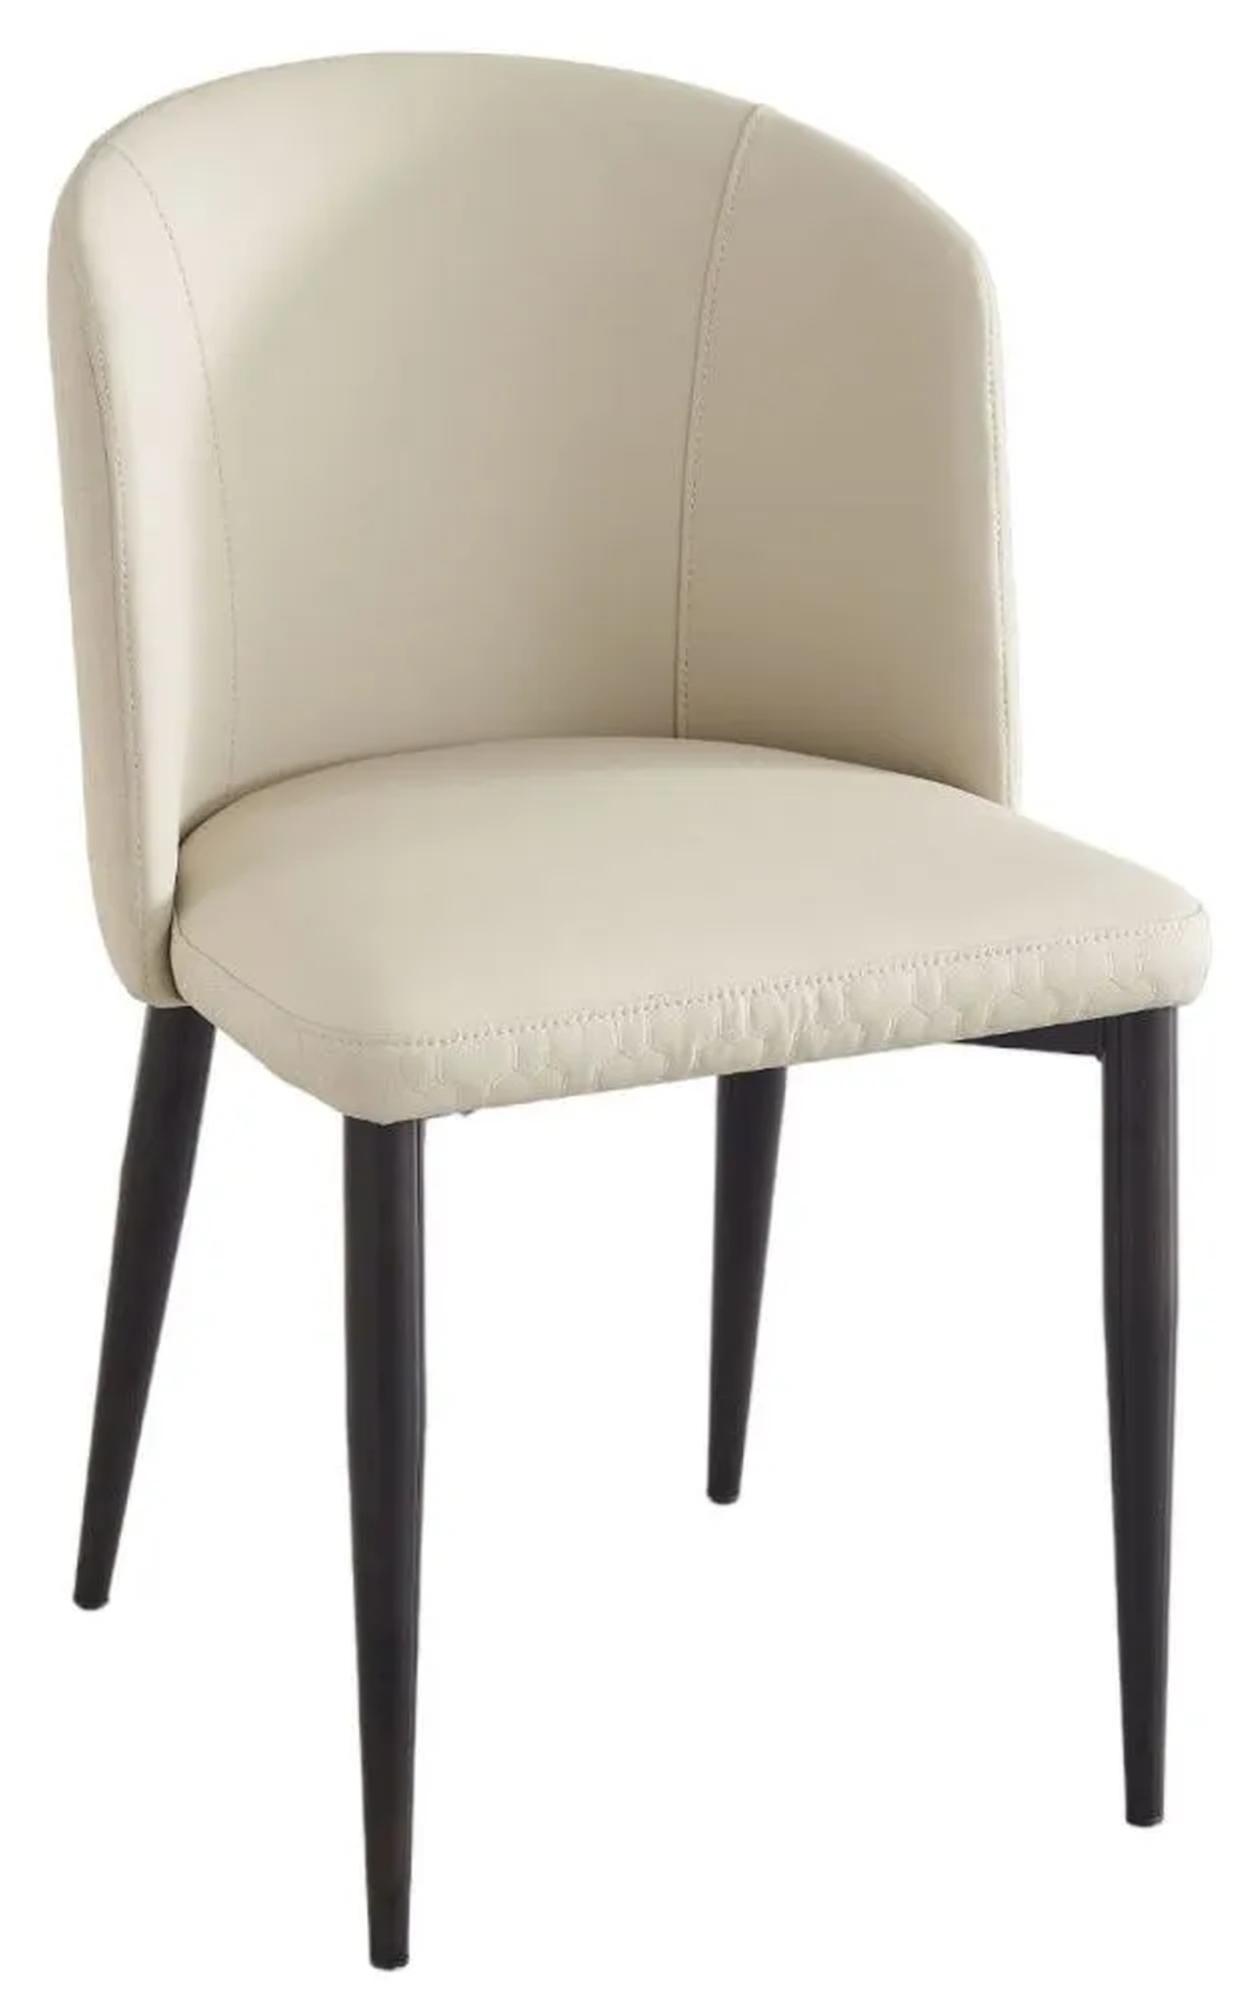 Deco Cream Faux Leather High Back Dining Chair with Black Legs